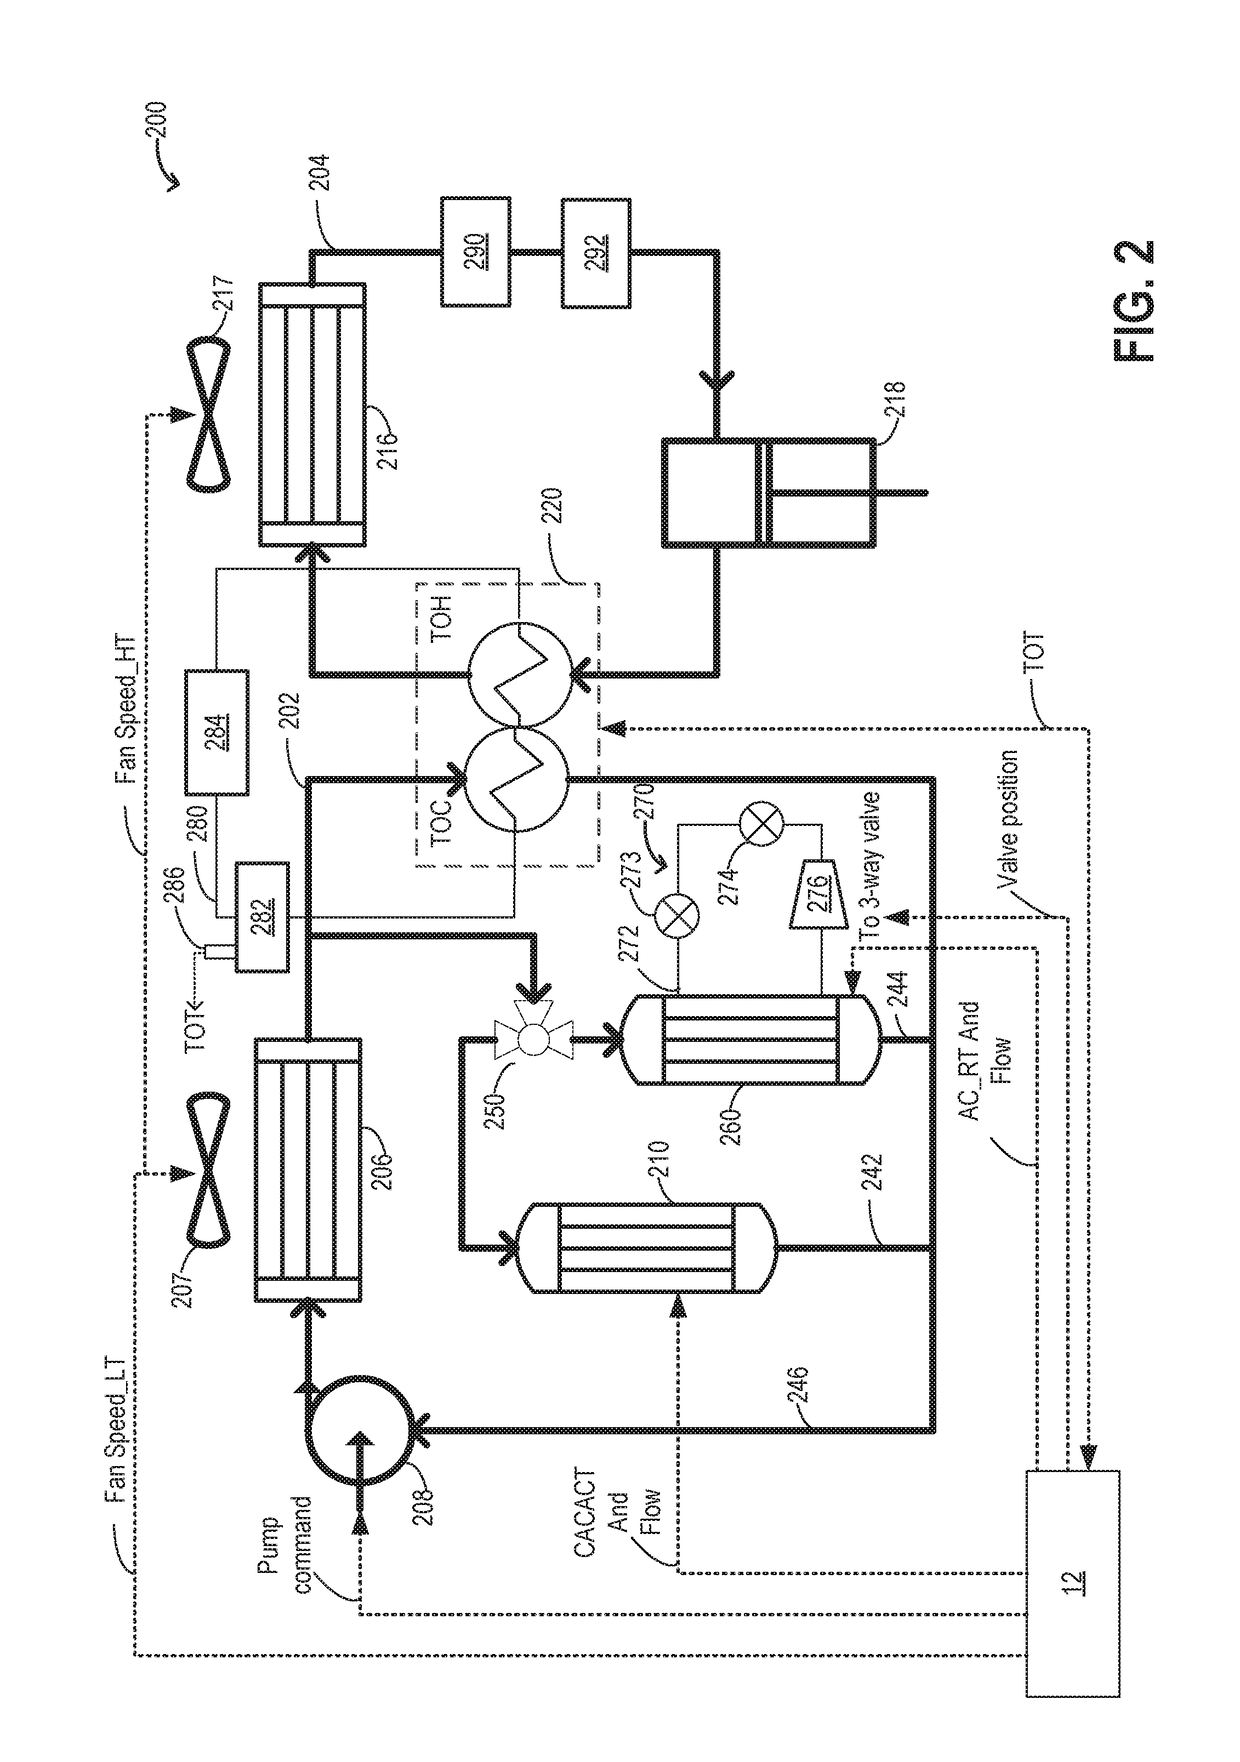 Methods and systems for coolant system